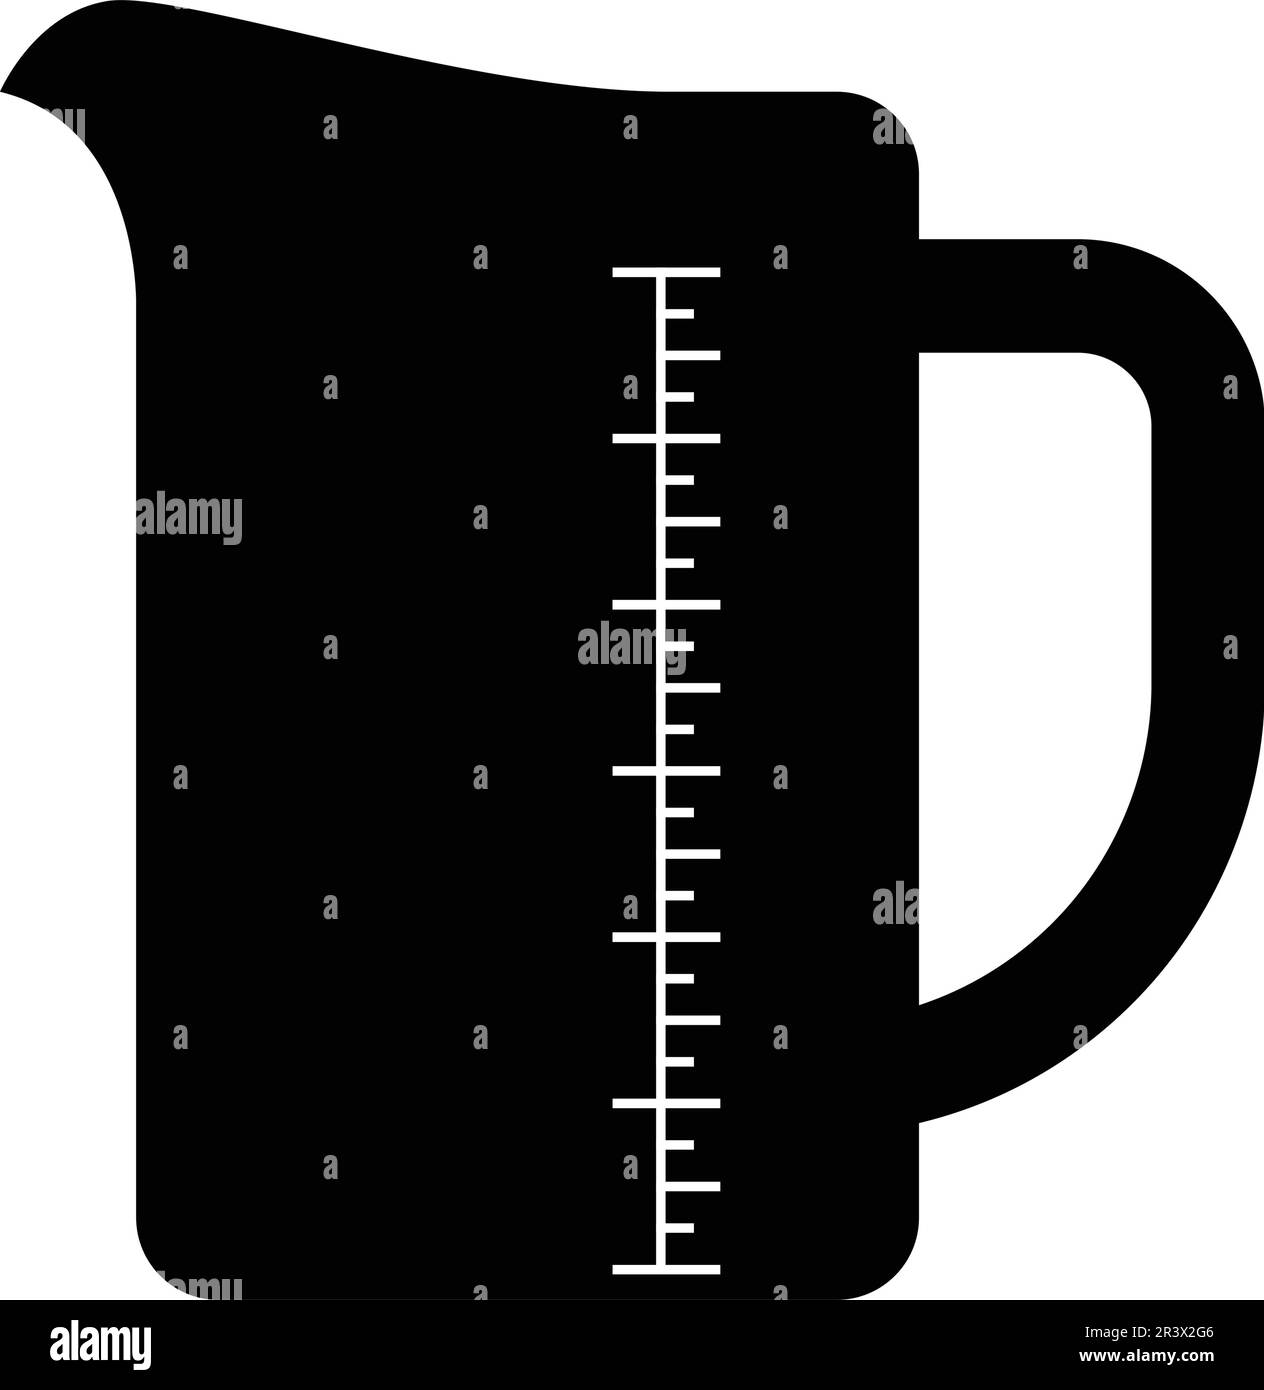 Measuring cup Black and White Stock Photos & Images - Alamy